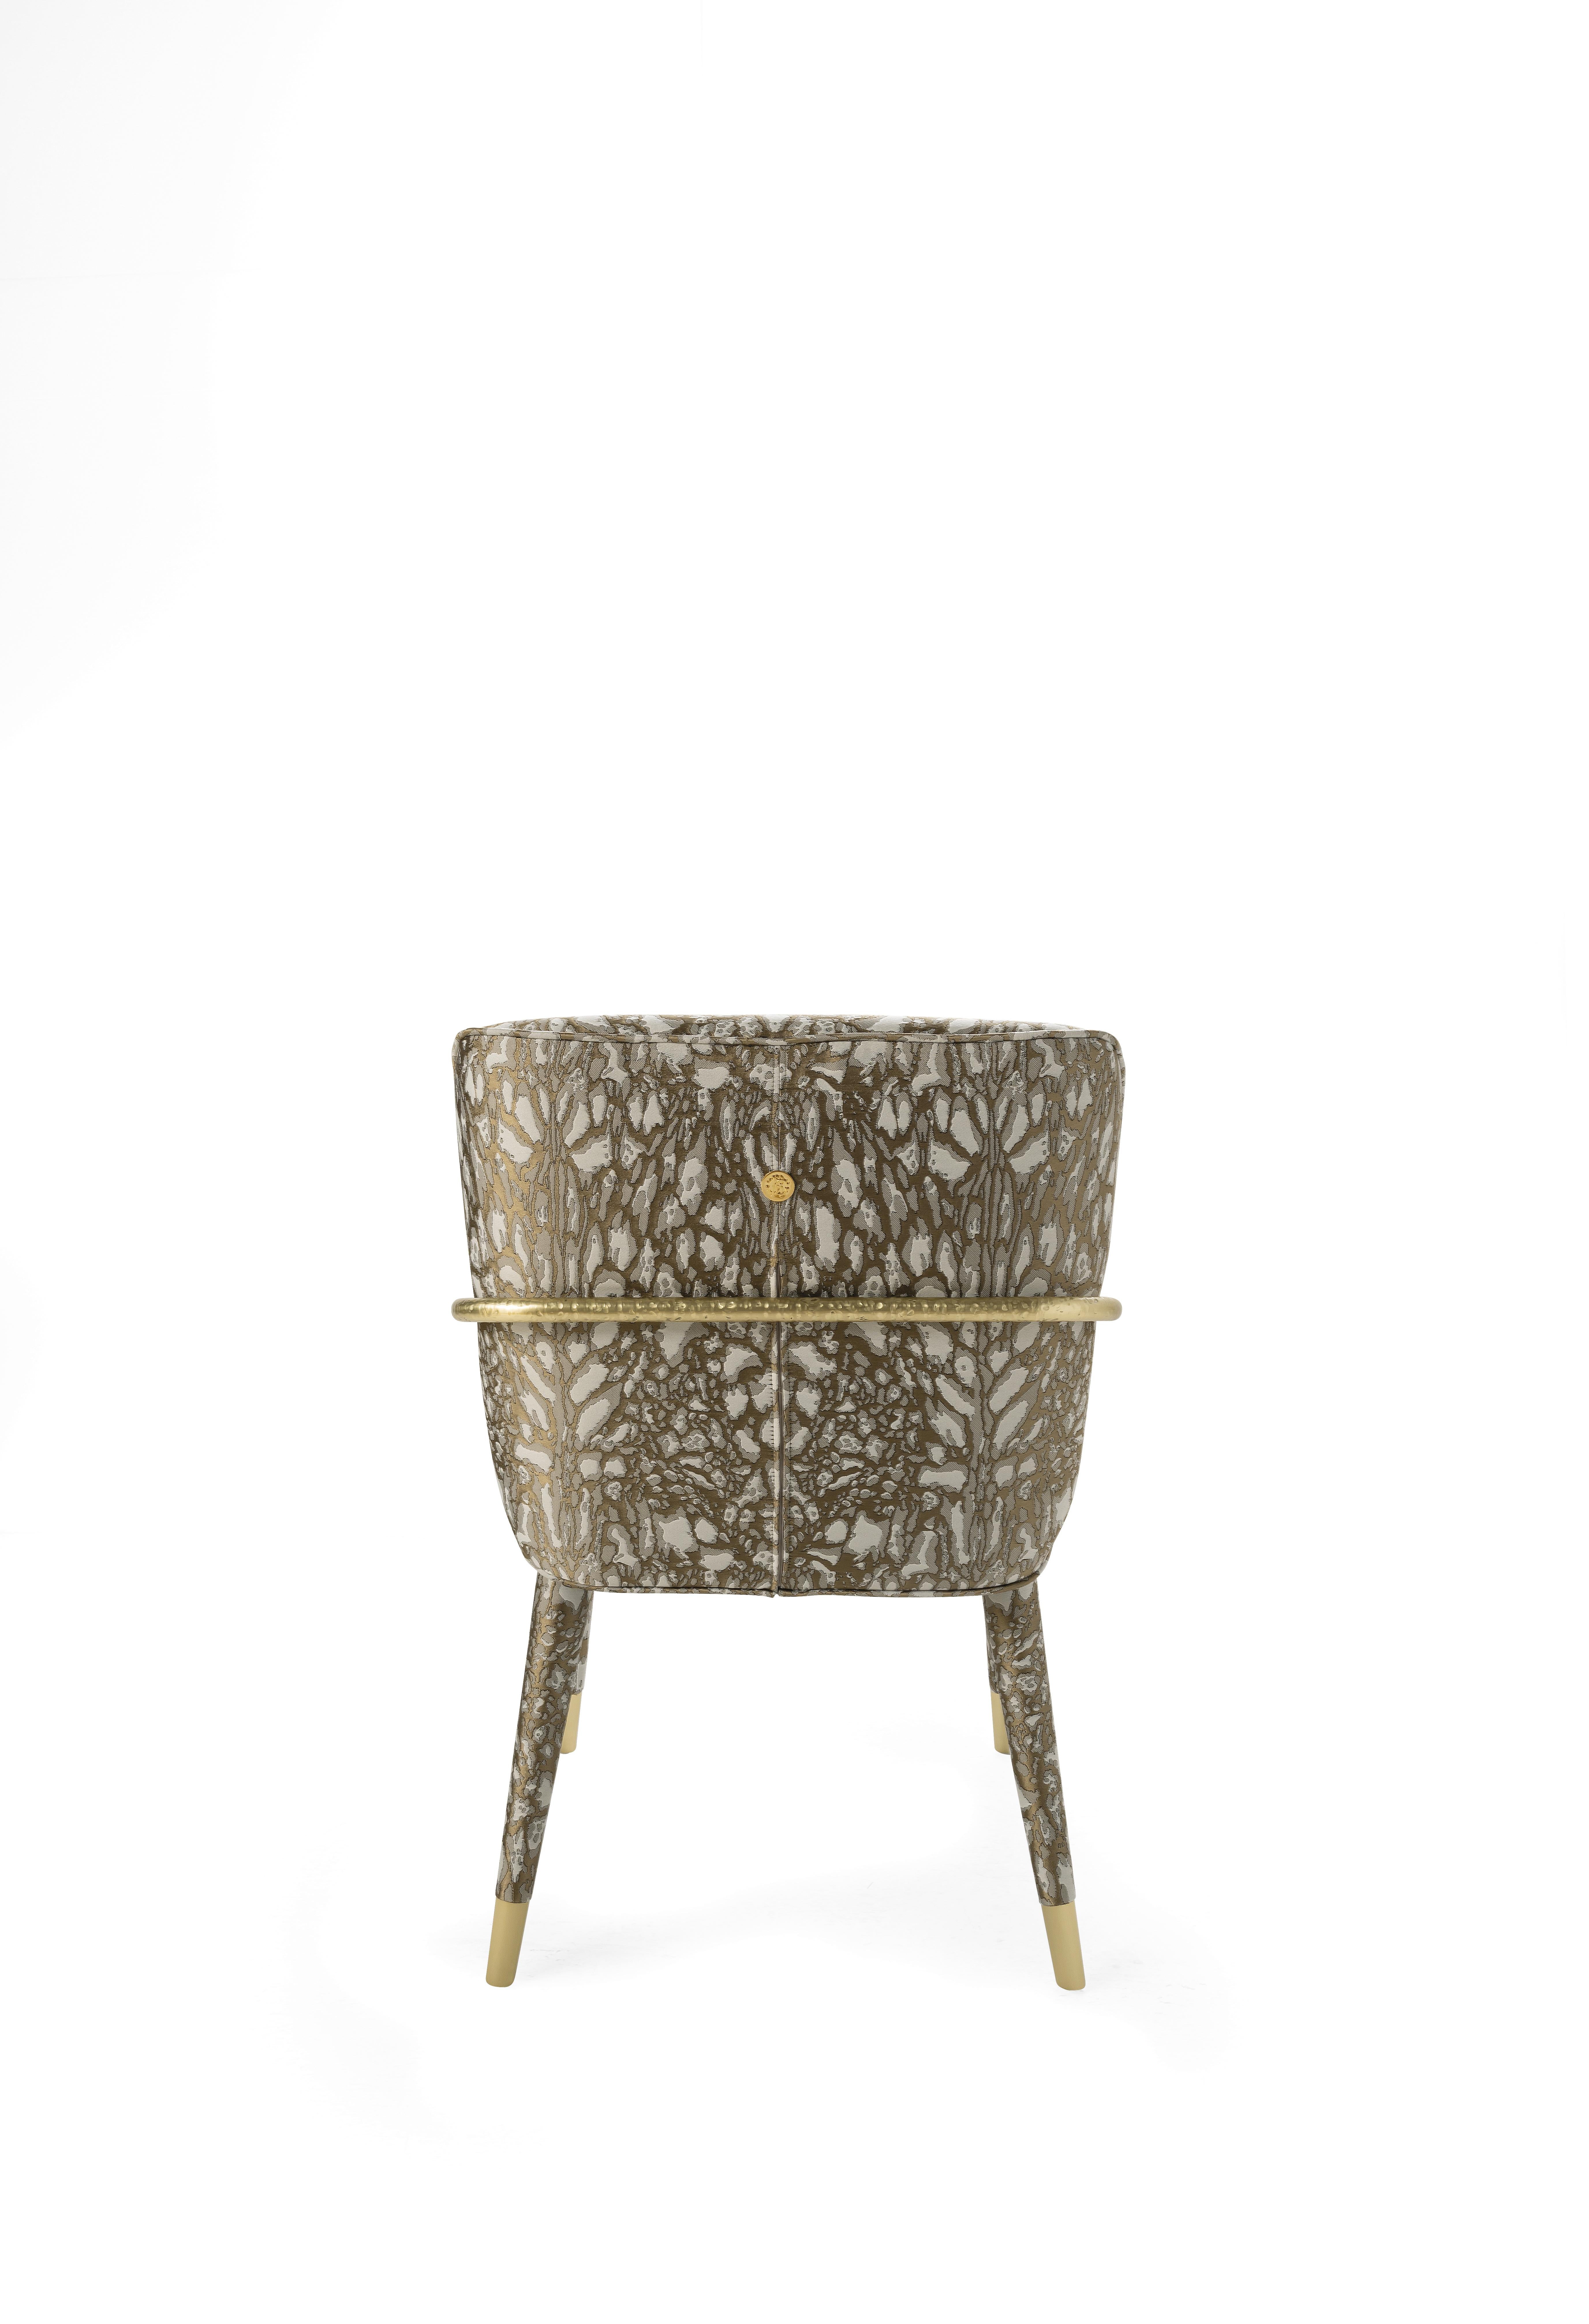 Modern 21st Century Kivu Chair in Fabric by Roberto Cavalli Home Interiors For Sale